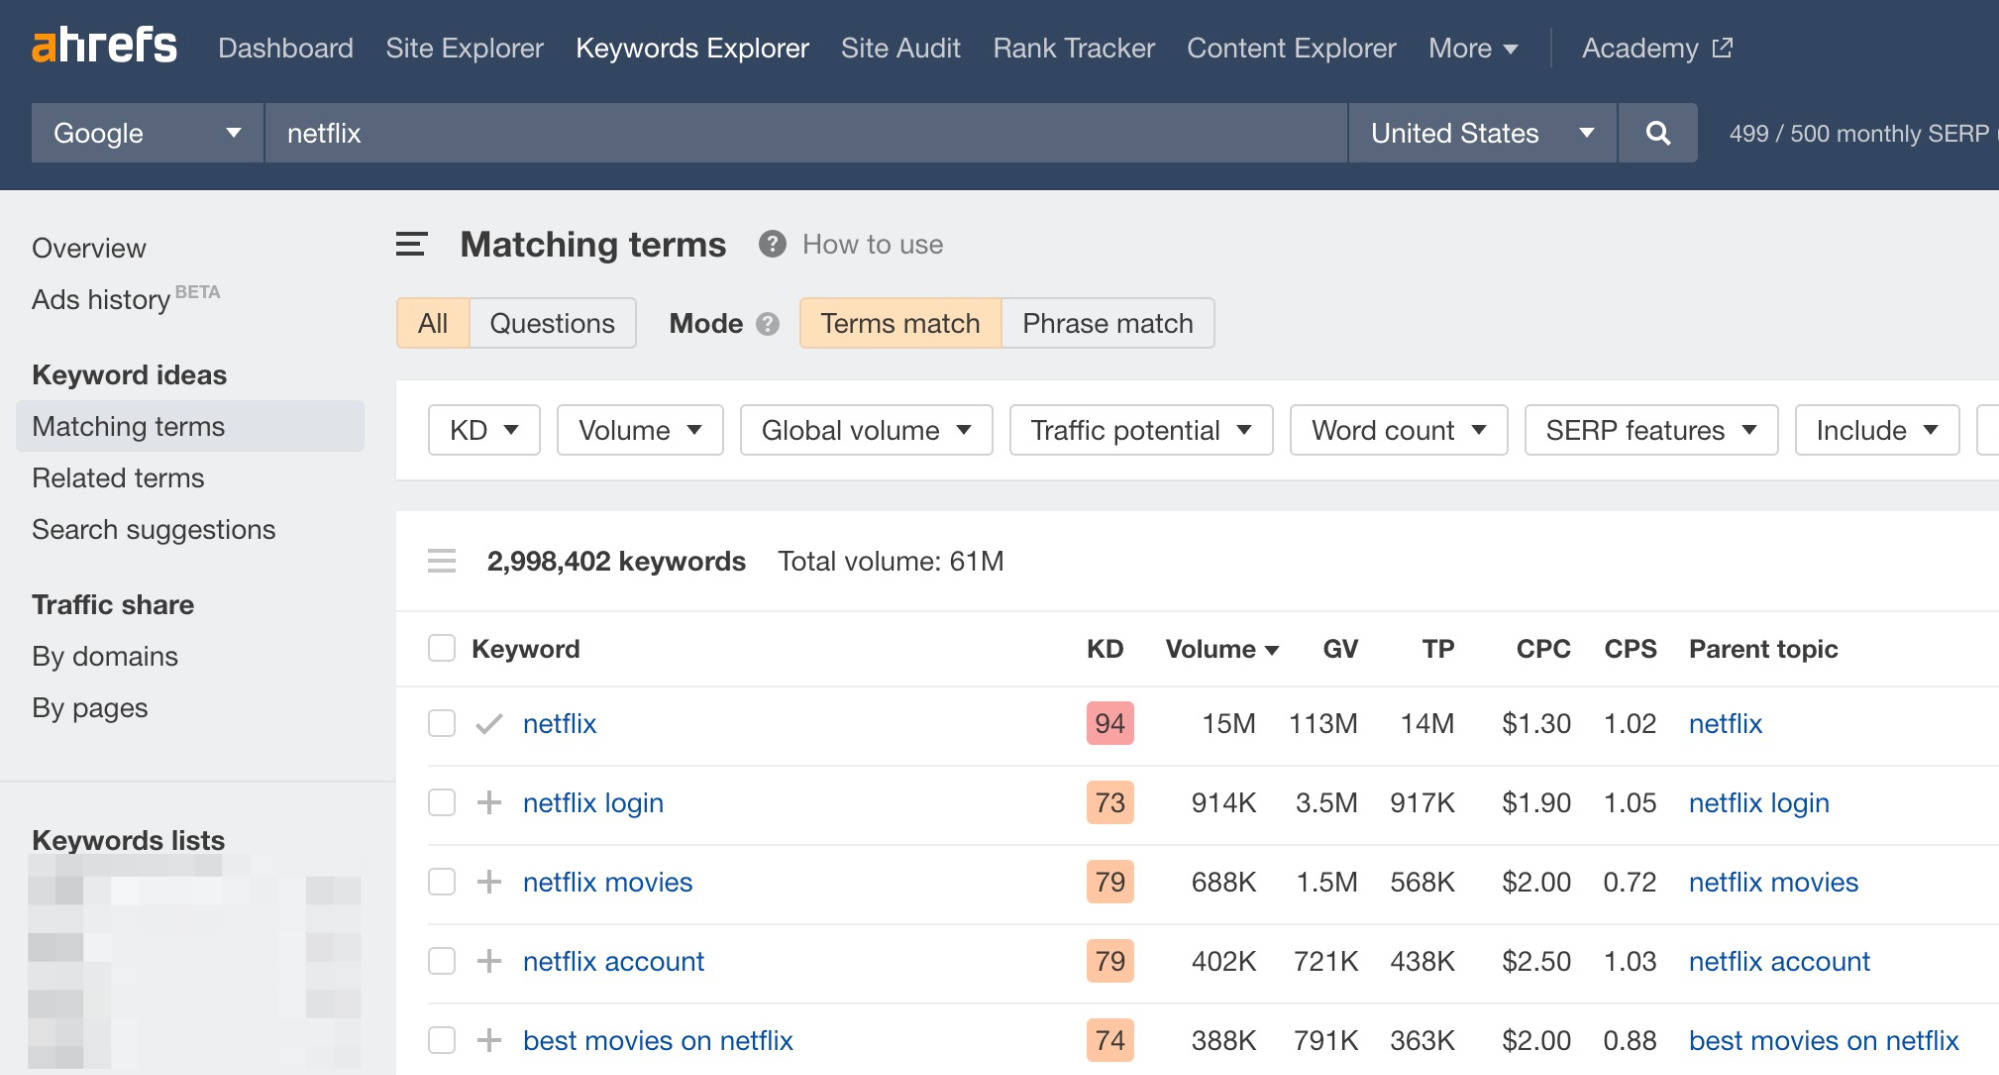 Matching terms report results for "netflix"